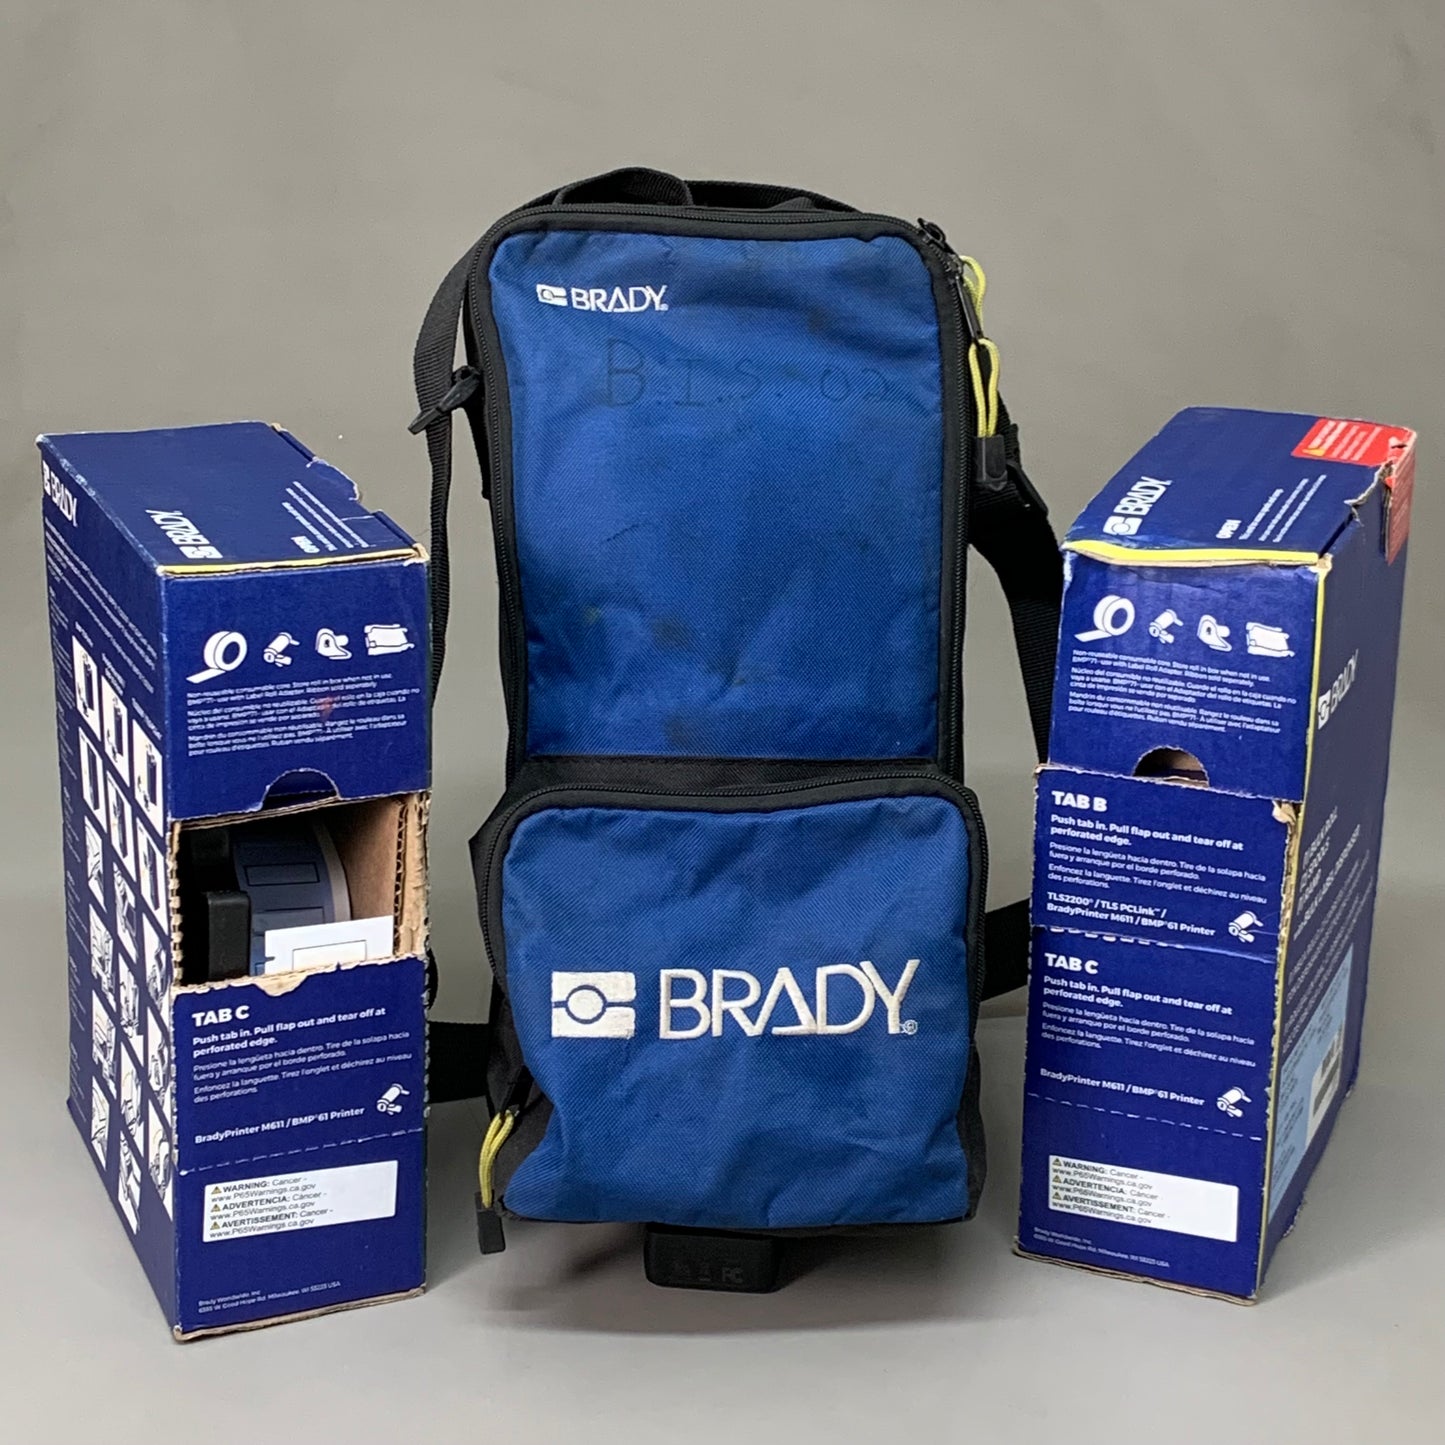 BRADY Portable Handheld Label Printer BMP61 W/ 2 Boxes of Heat Shrink Labels (Pre-Owned)